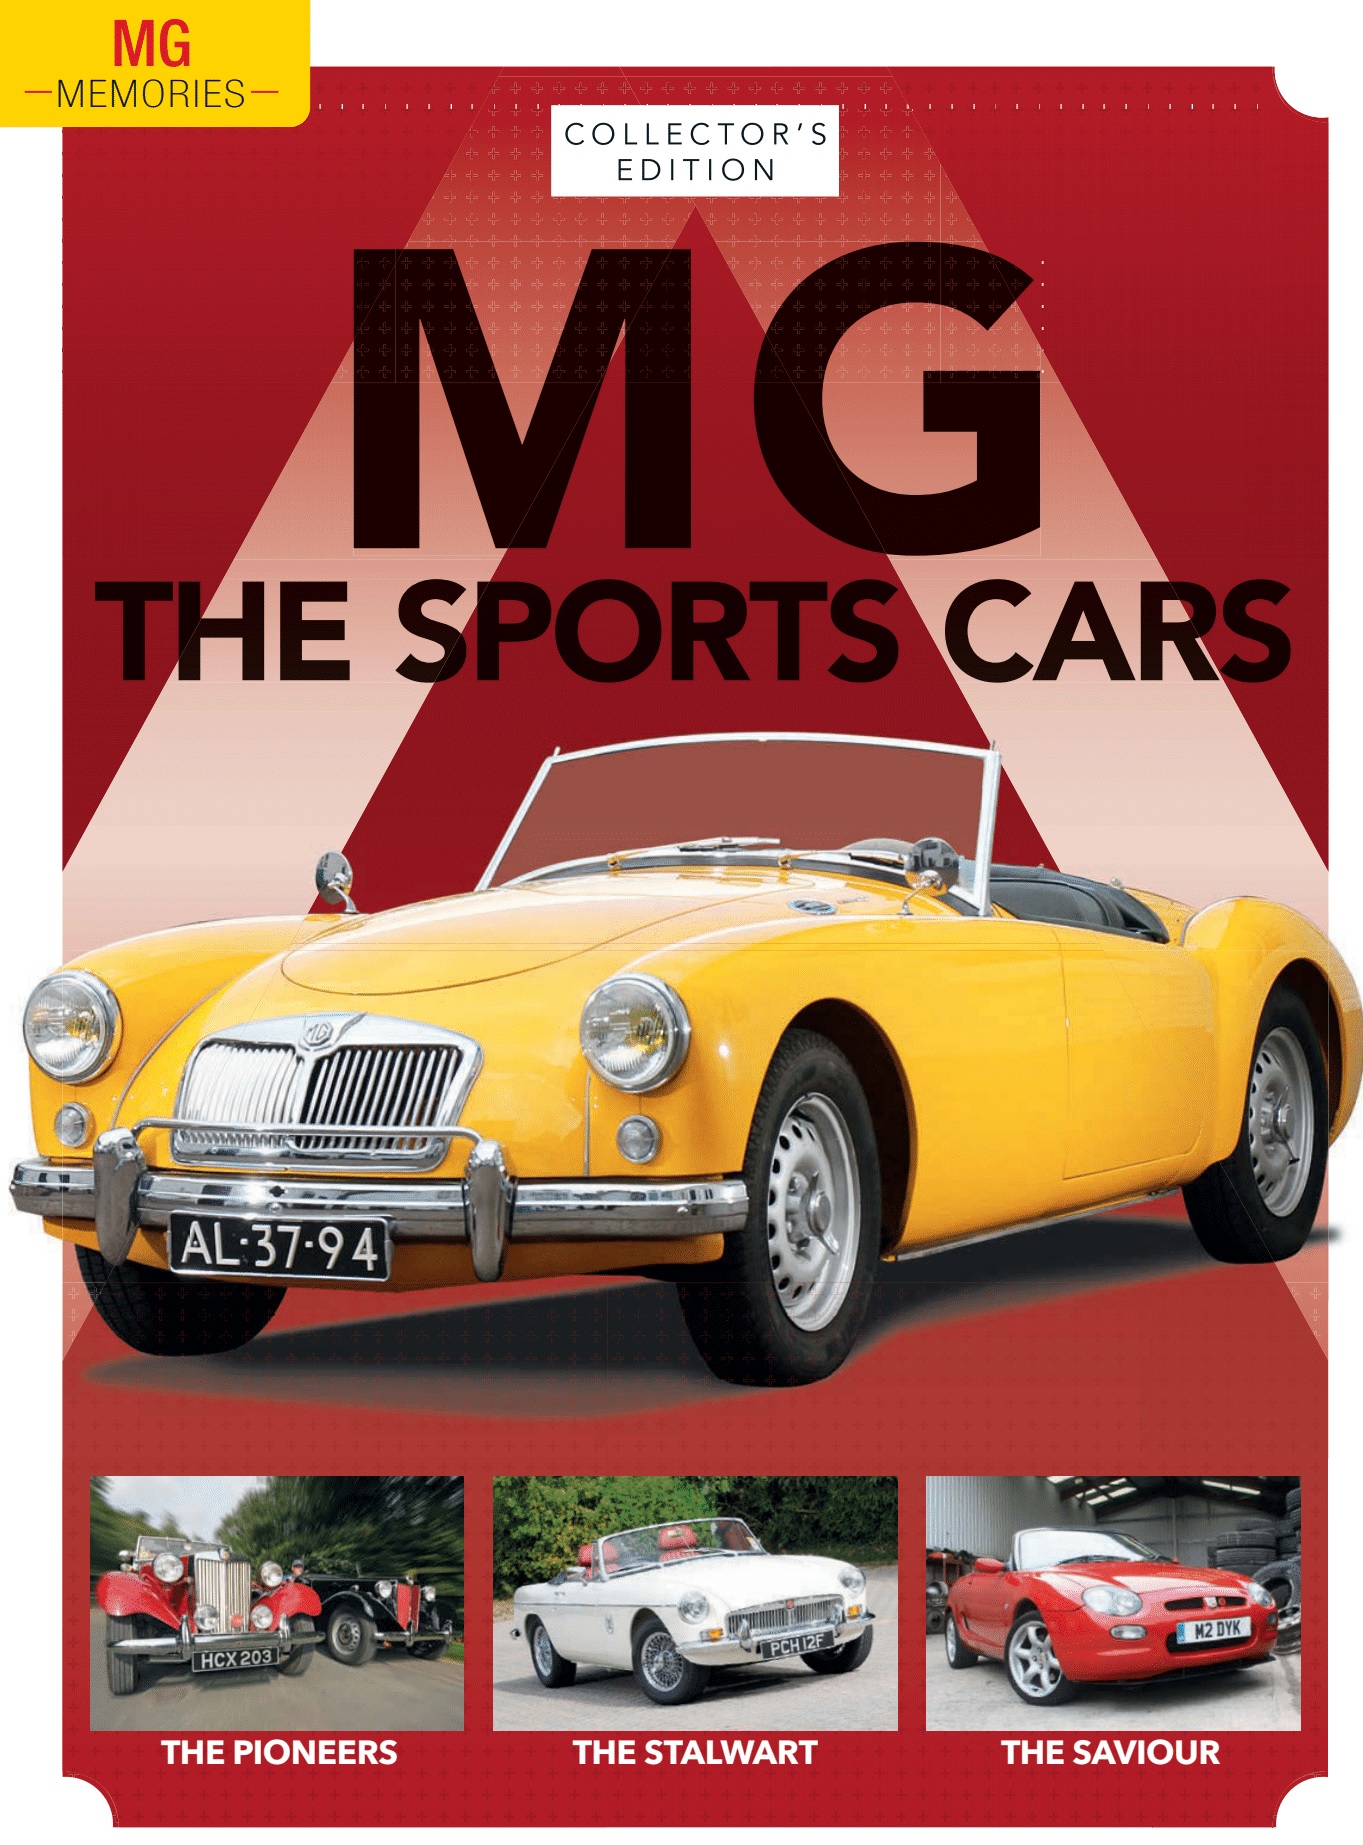 MG Memories #6 The Sports Cars